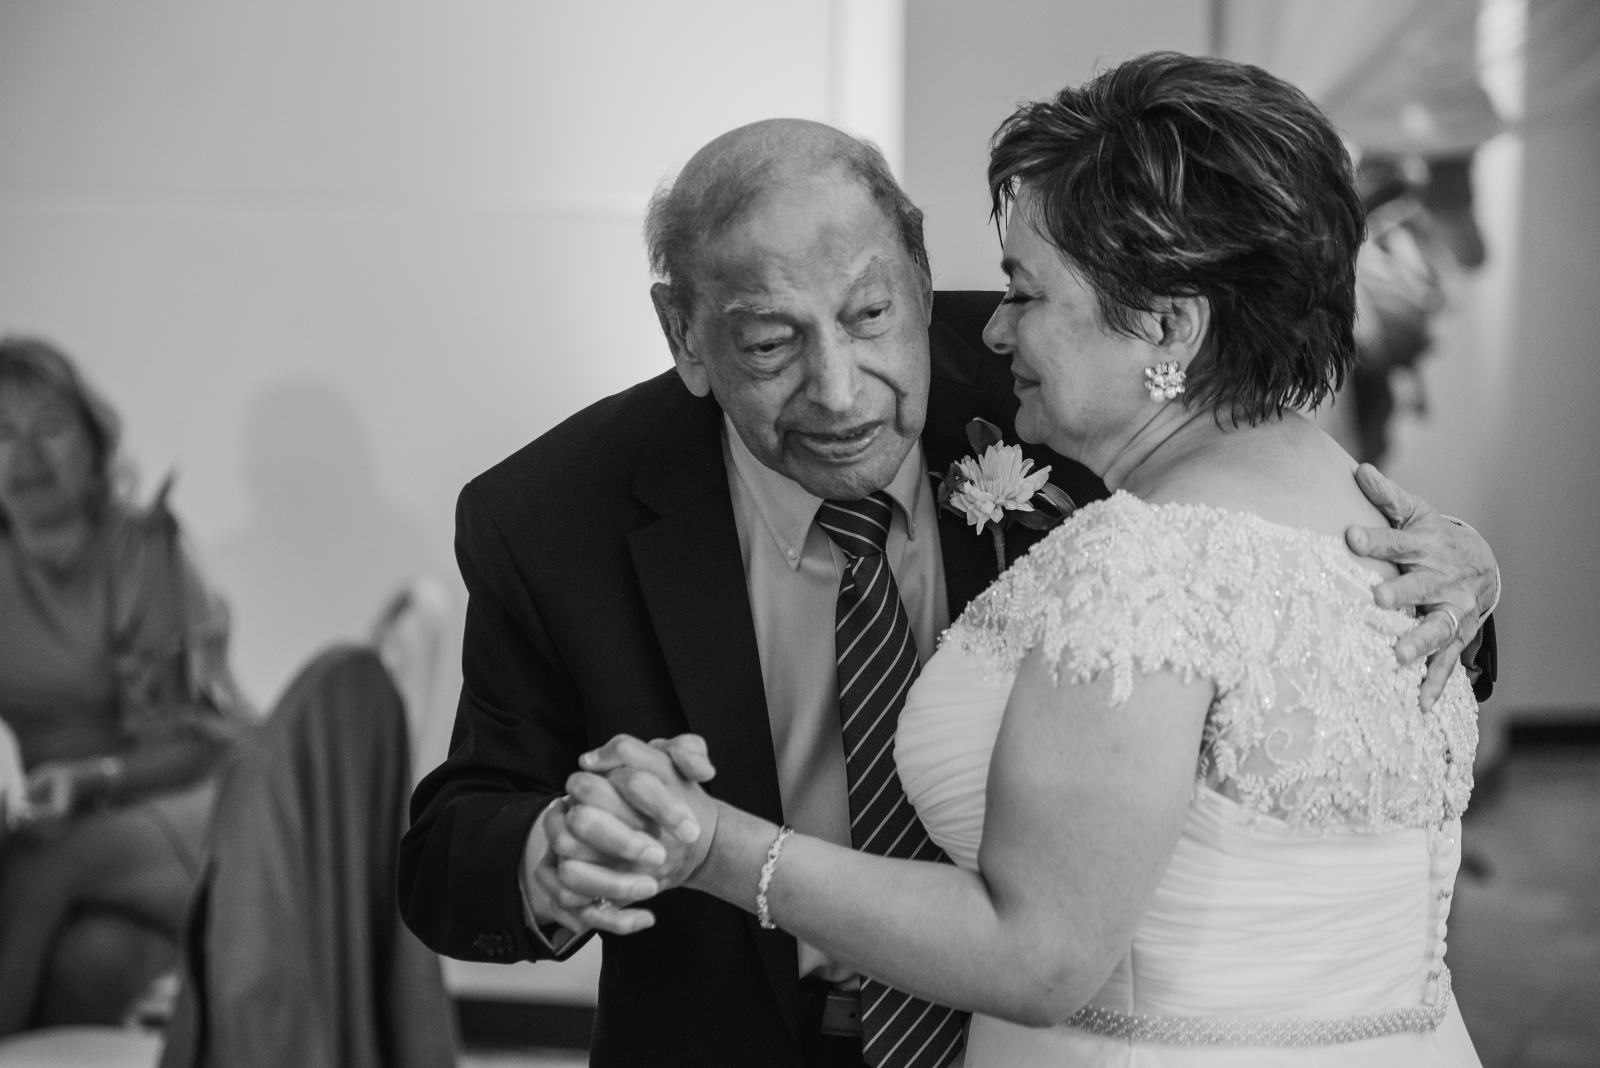 Bride and dad, father of the bride, father daughter dance, formal wedding dance, classic wedding photo, black and white, cute, sweet, older bride, older couple, romantic urban wedding reception at Penthouse Events, Ohio City, Cleveland Flats